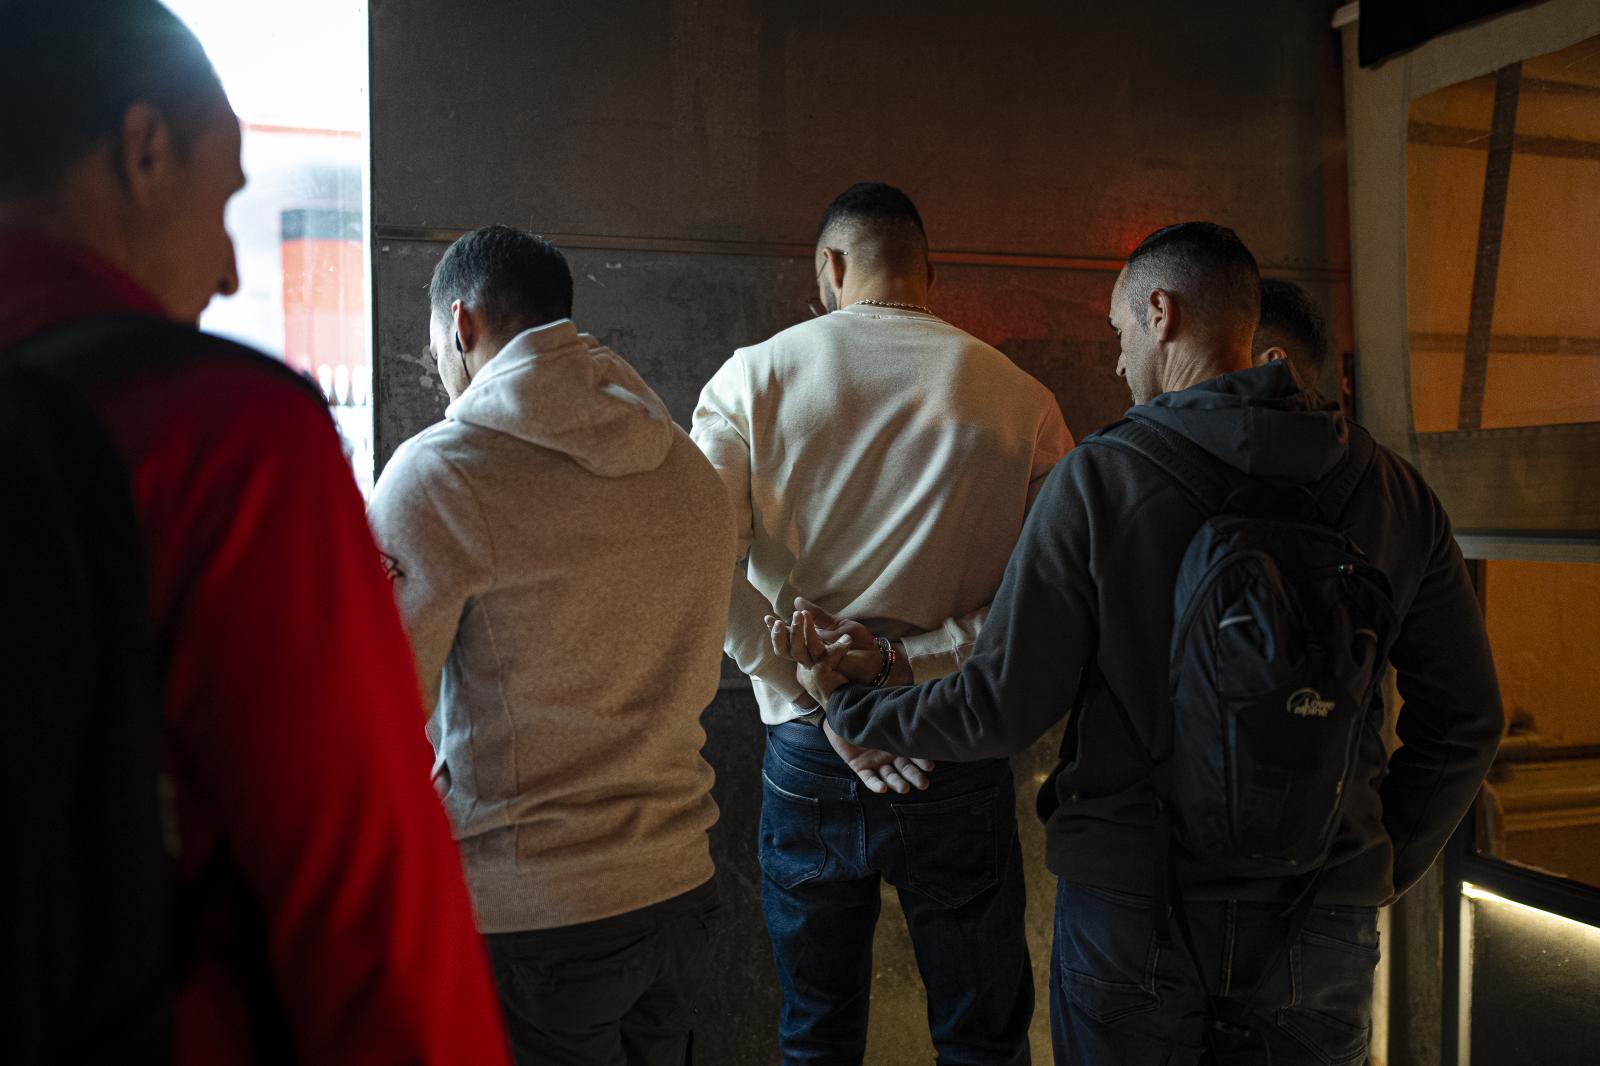 Image from DAILY NEWS - Plainclothes officers of the Titani group of the Mossos...